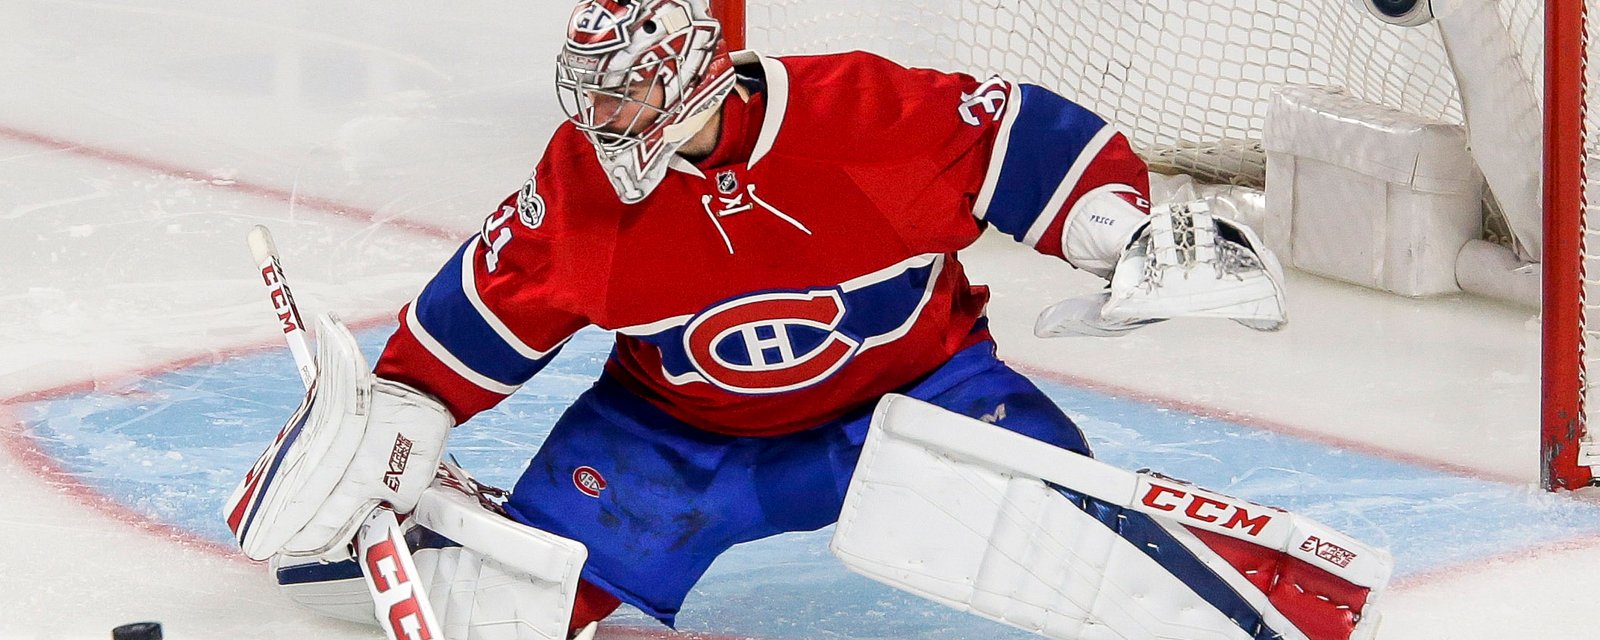 Breaking: Carey Price reveals he suffered from a potentially disabling illness this season